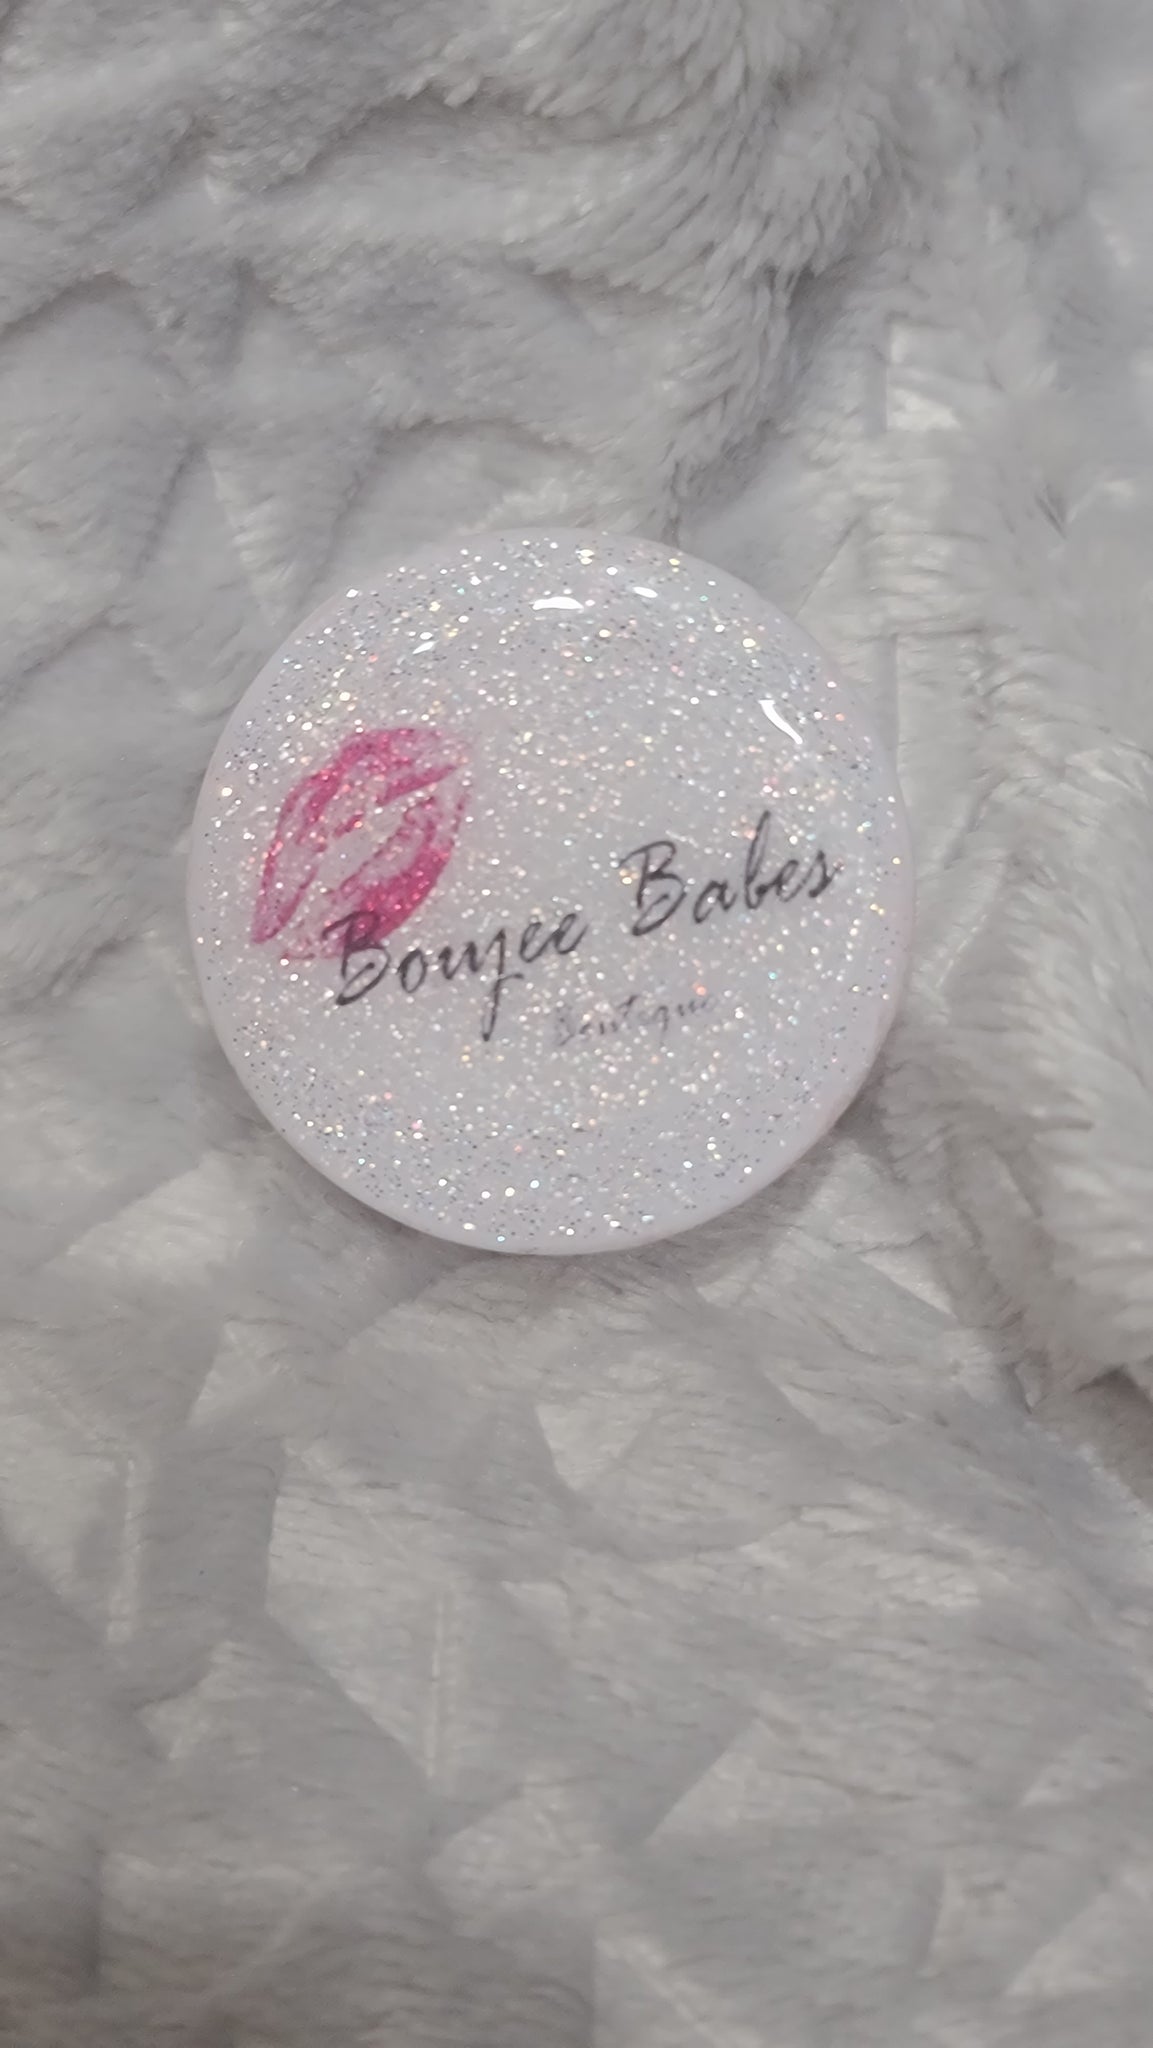 Boujee Babes Boutique Glitter Phone Grip